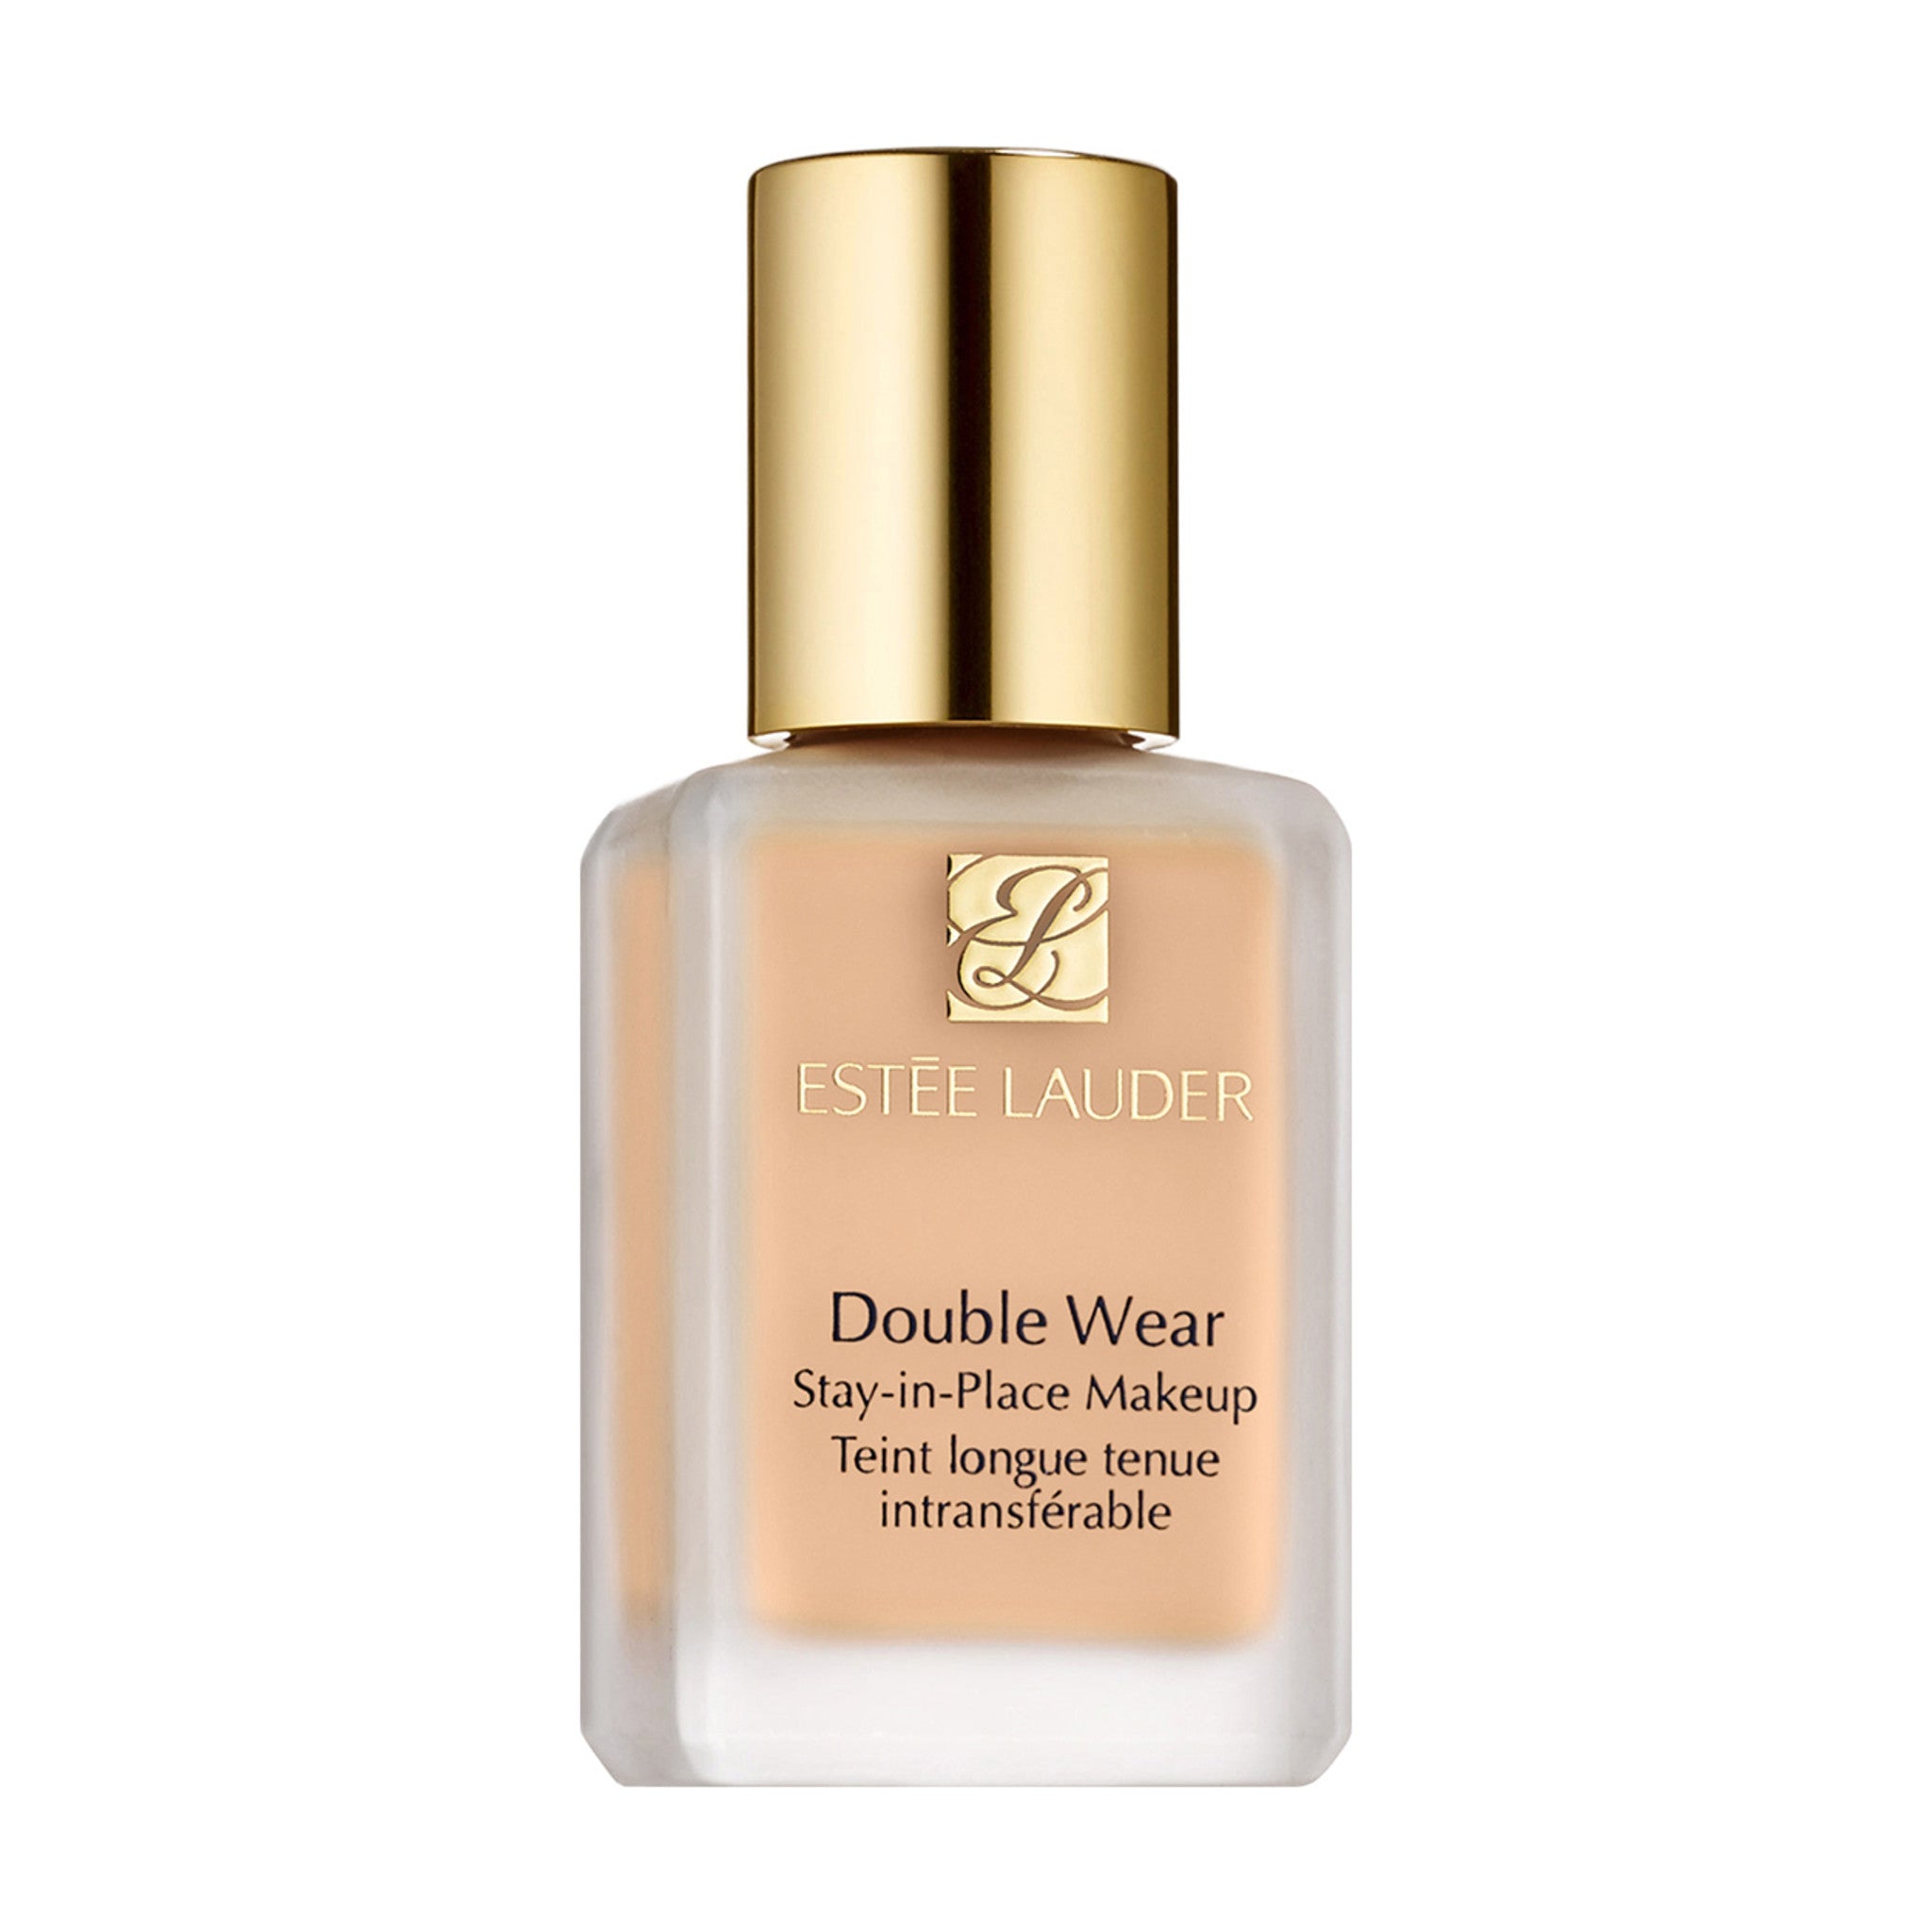 Estée Lauder Double Wear Stay-in-Place Foundation Color/Shade variant: 1C1 Cool Bone main image. This product is for light cool peach complexions